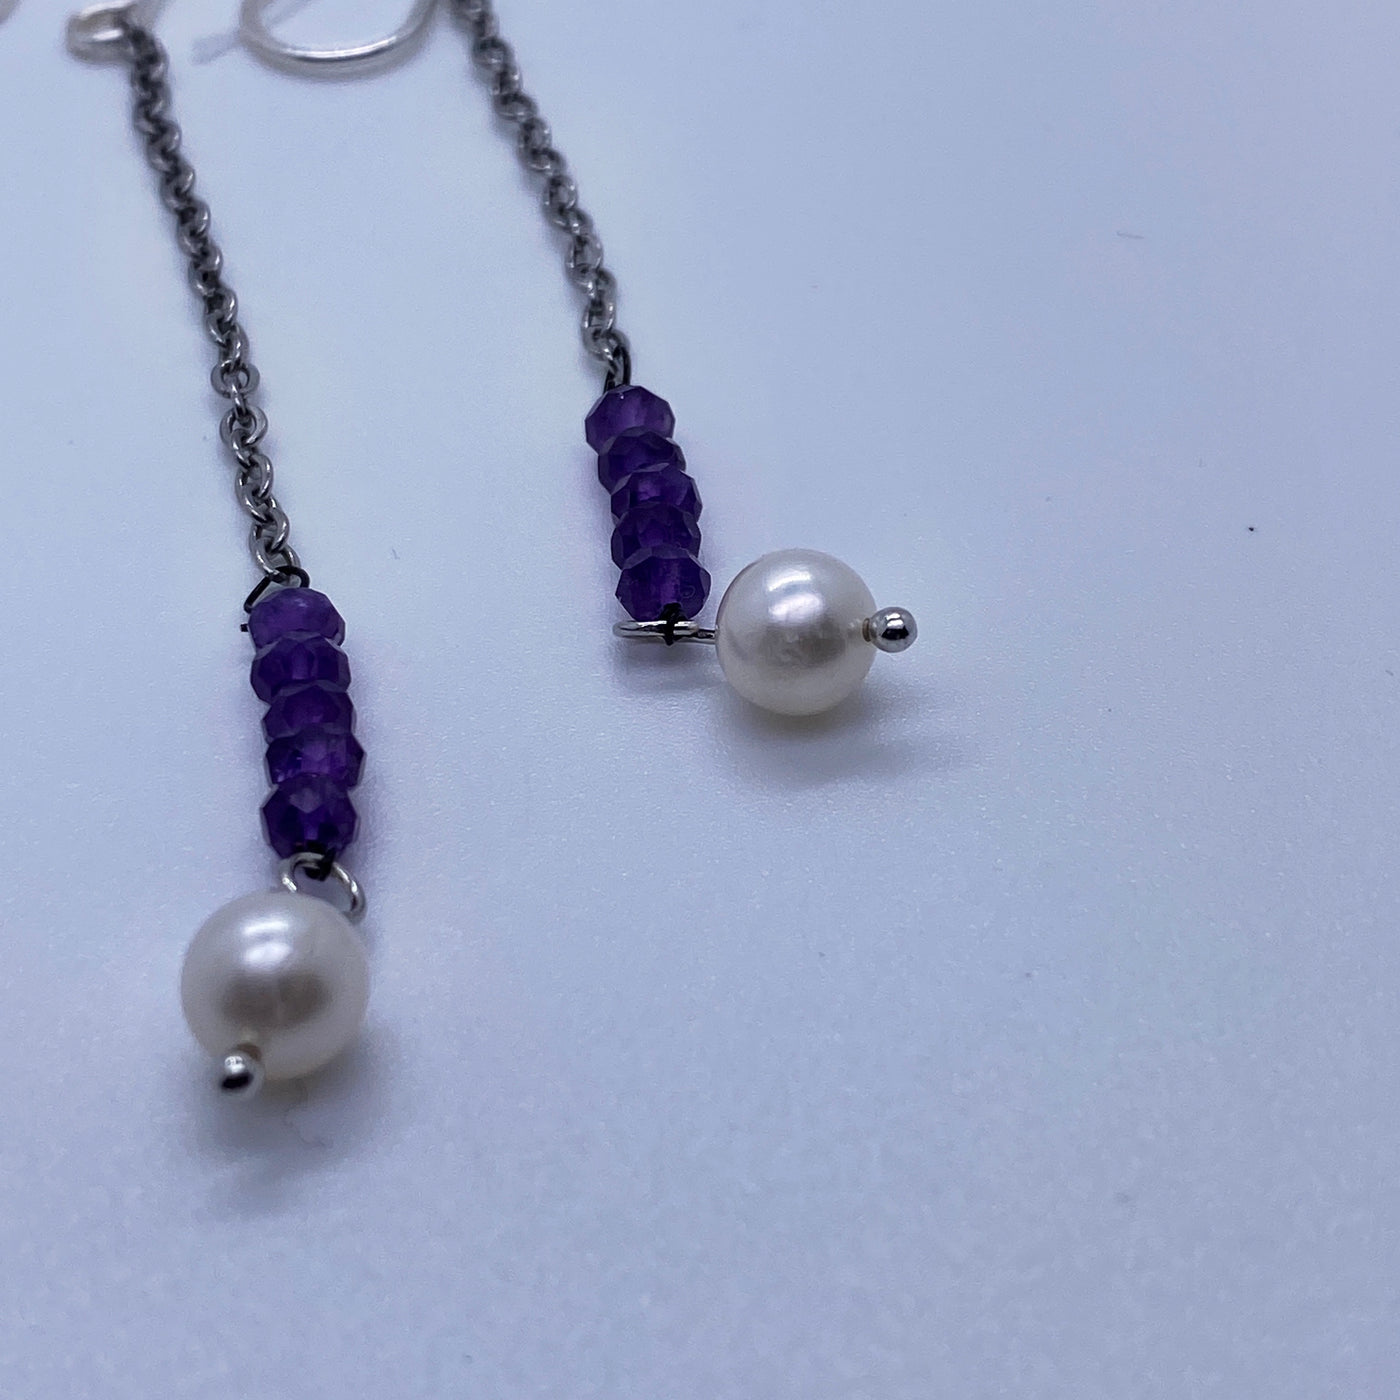 Earrings pearls and amethyst on silver chain